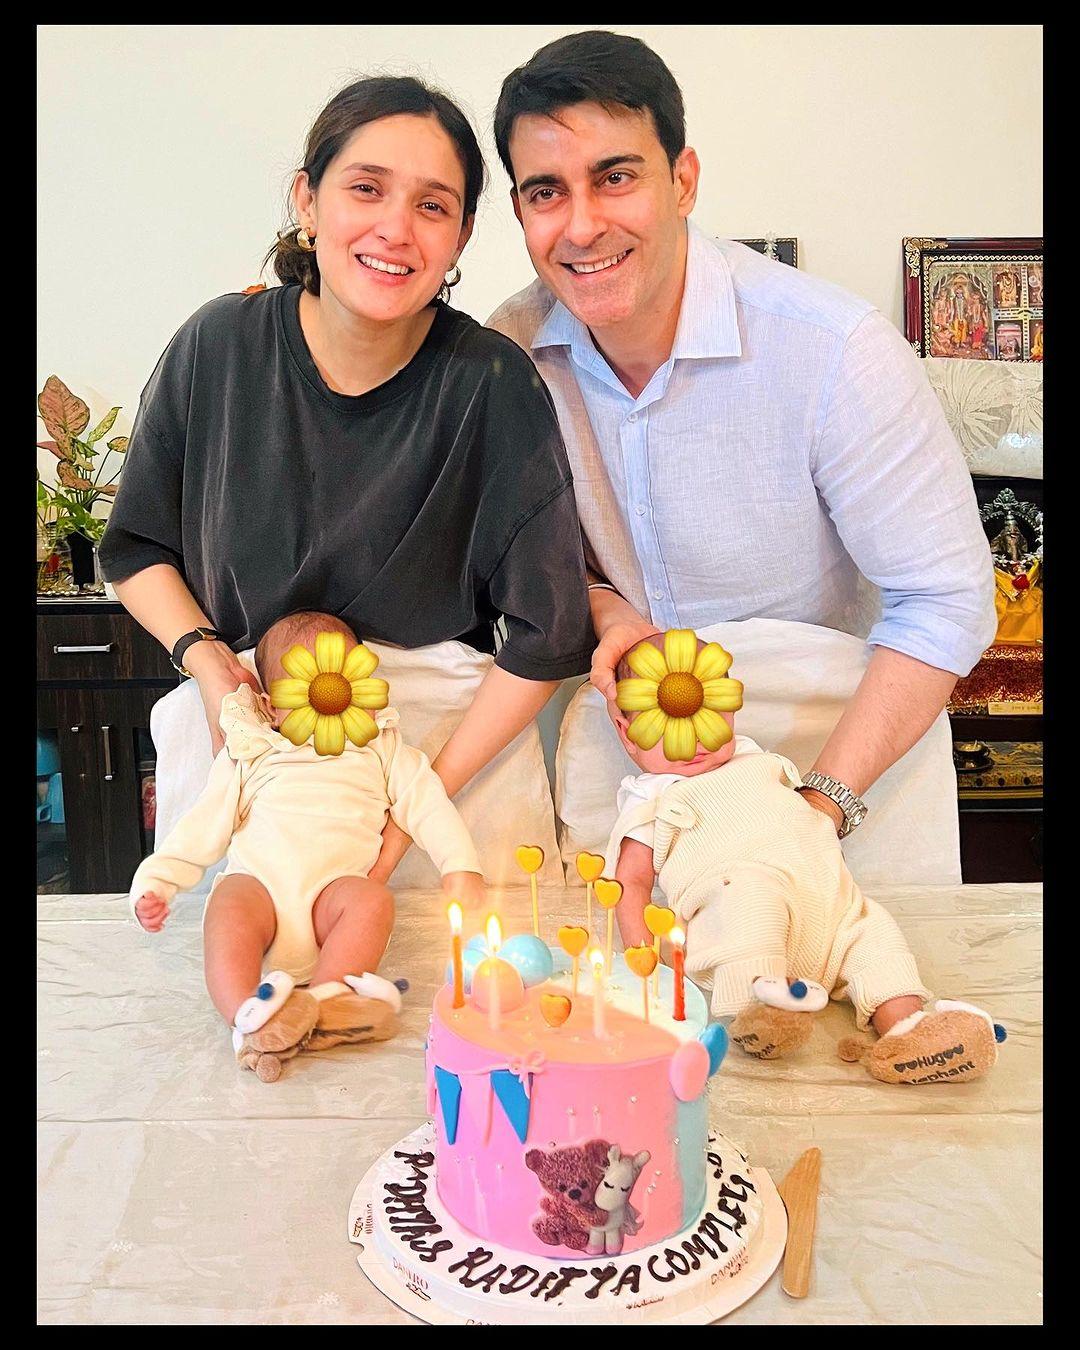 Gautam Rode and Pankhuri Awasthy
On July 26, one of the most popular couples on television, Pankhuri Awasthy Rode and Gautam Rode became parents to twins 